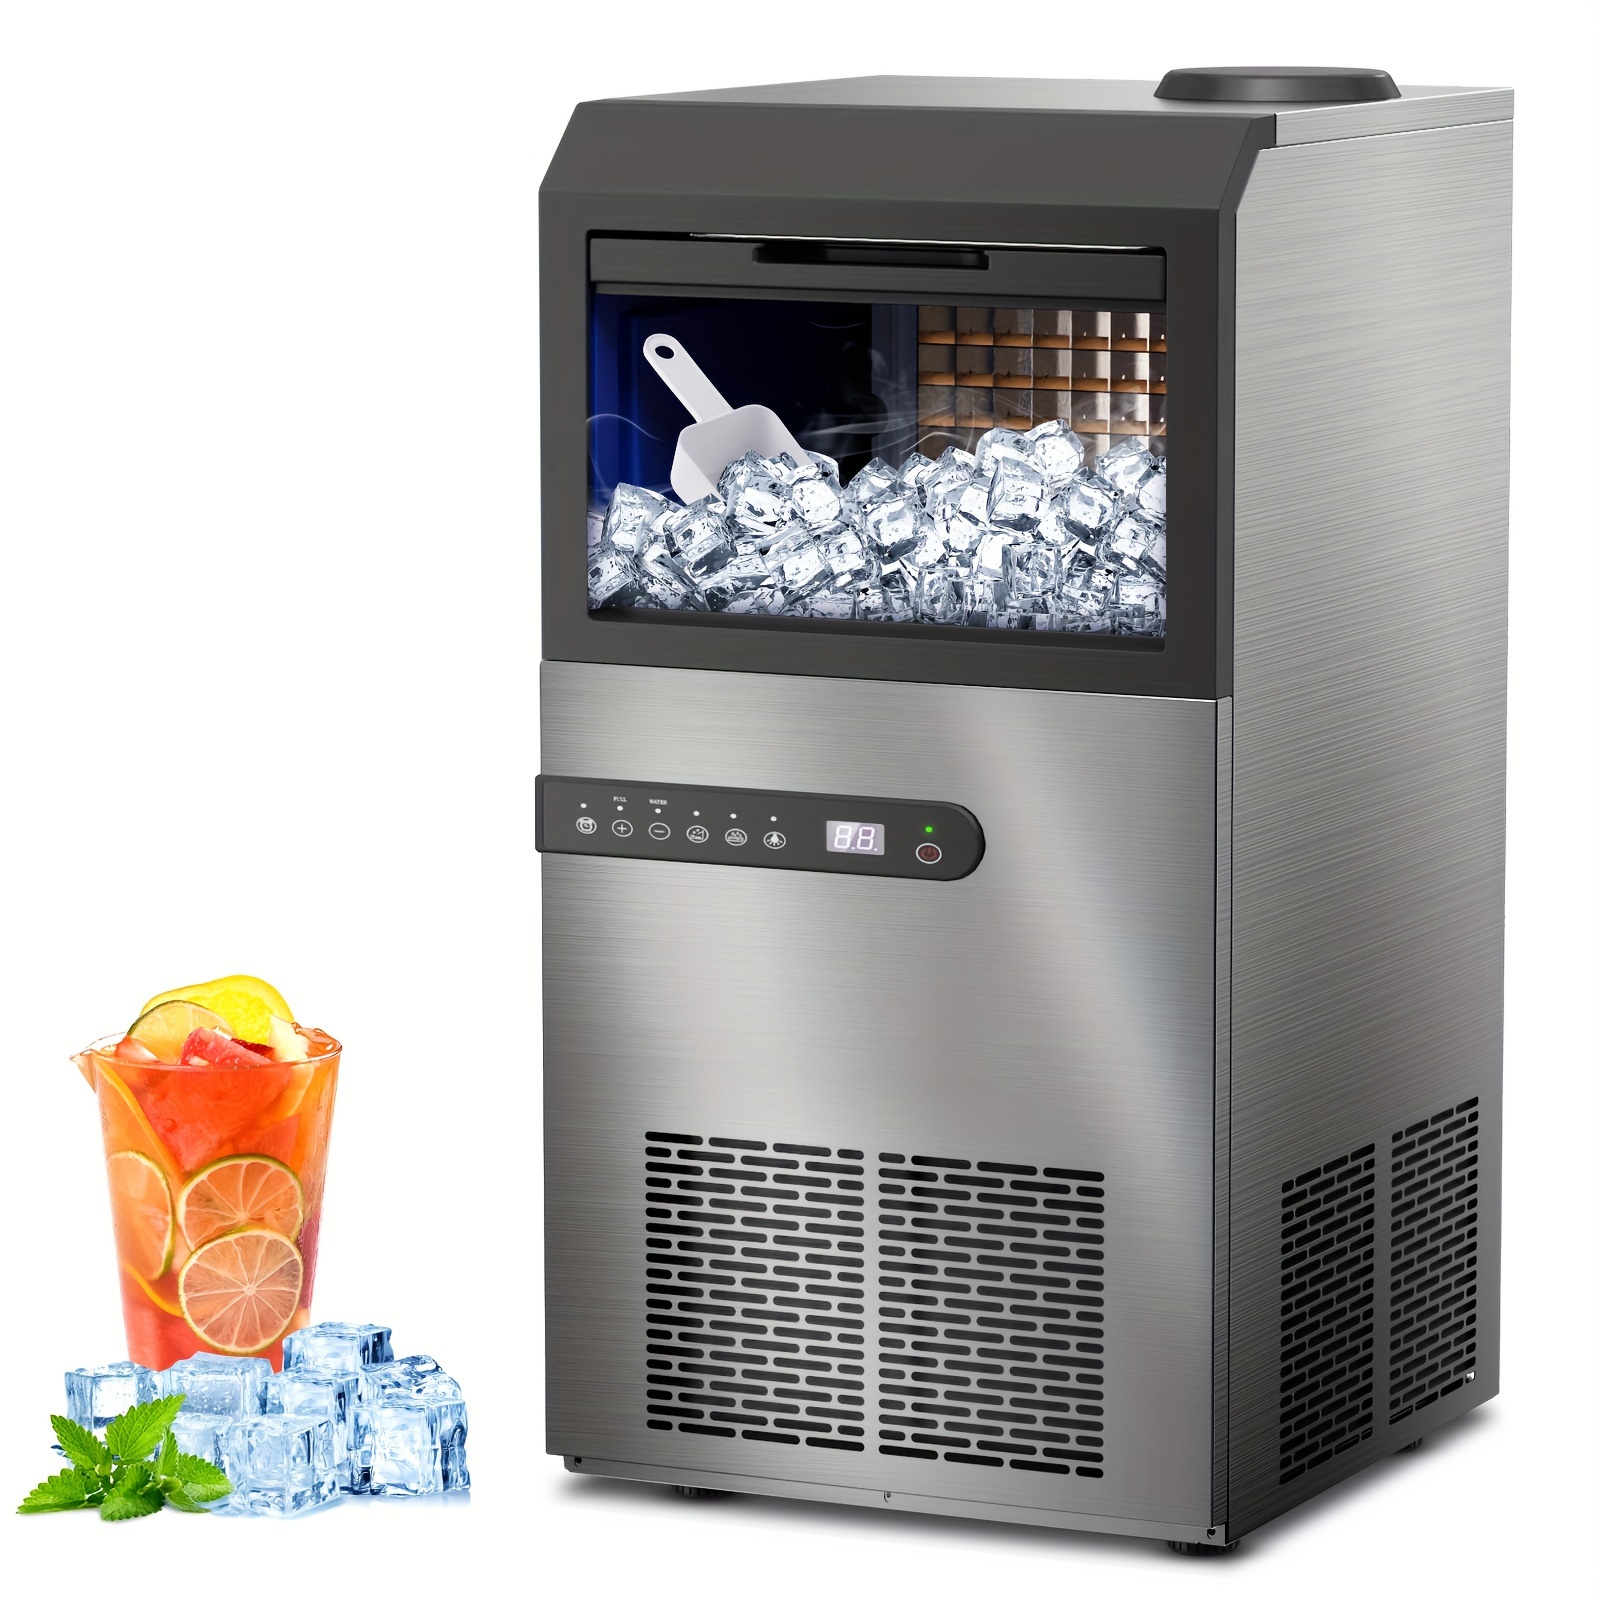 

Comfort Choice Commercial Ice Machine 100 Lbs Auto Clean Freestanding Stainless Steel For Home Kitchen Bar Office Coffee Shop